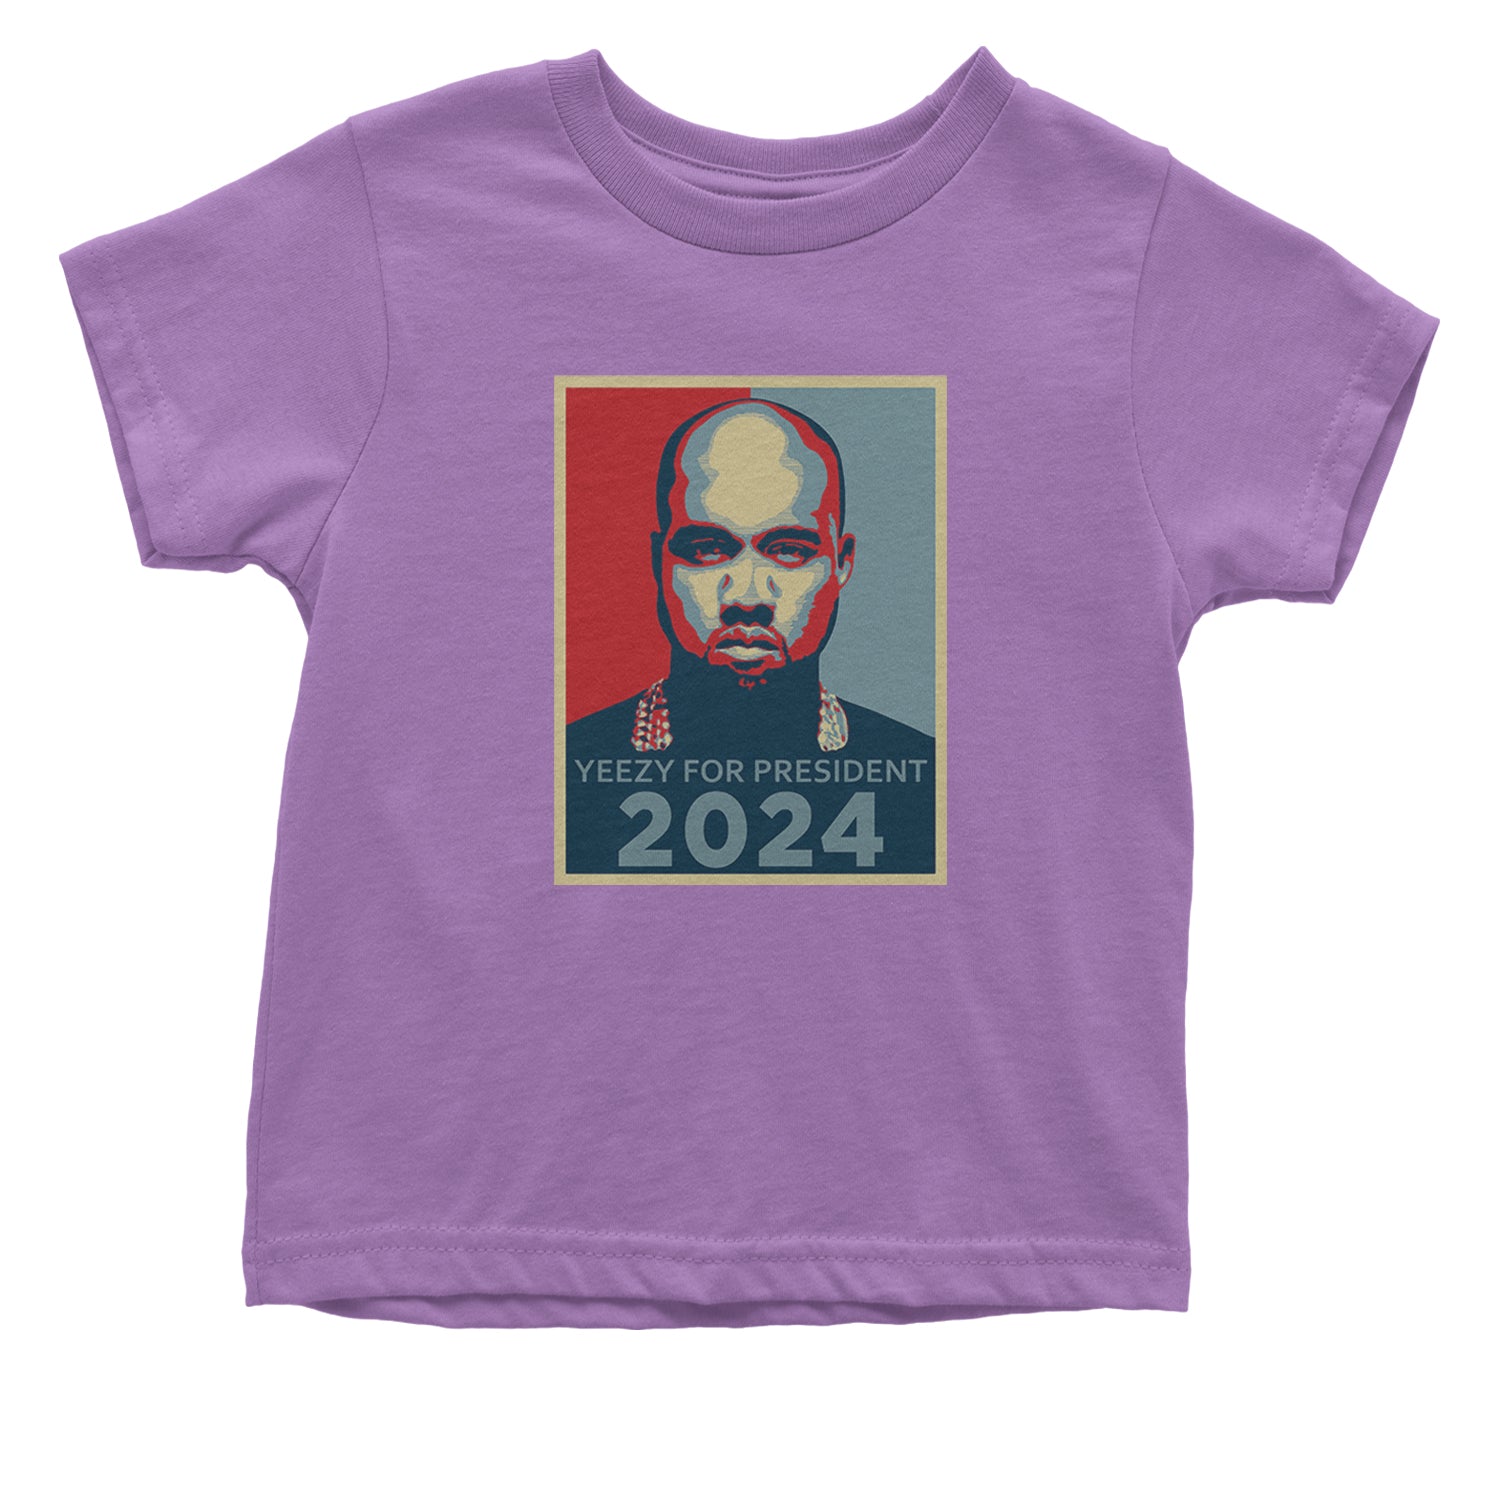 Yeezus For President Vote for Ye Infant One-Piece Romper Bodysuit and Toddler T-shirt Lavender